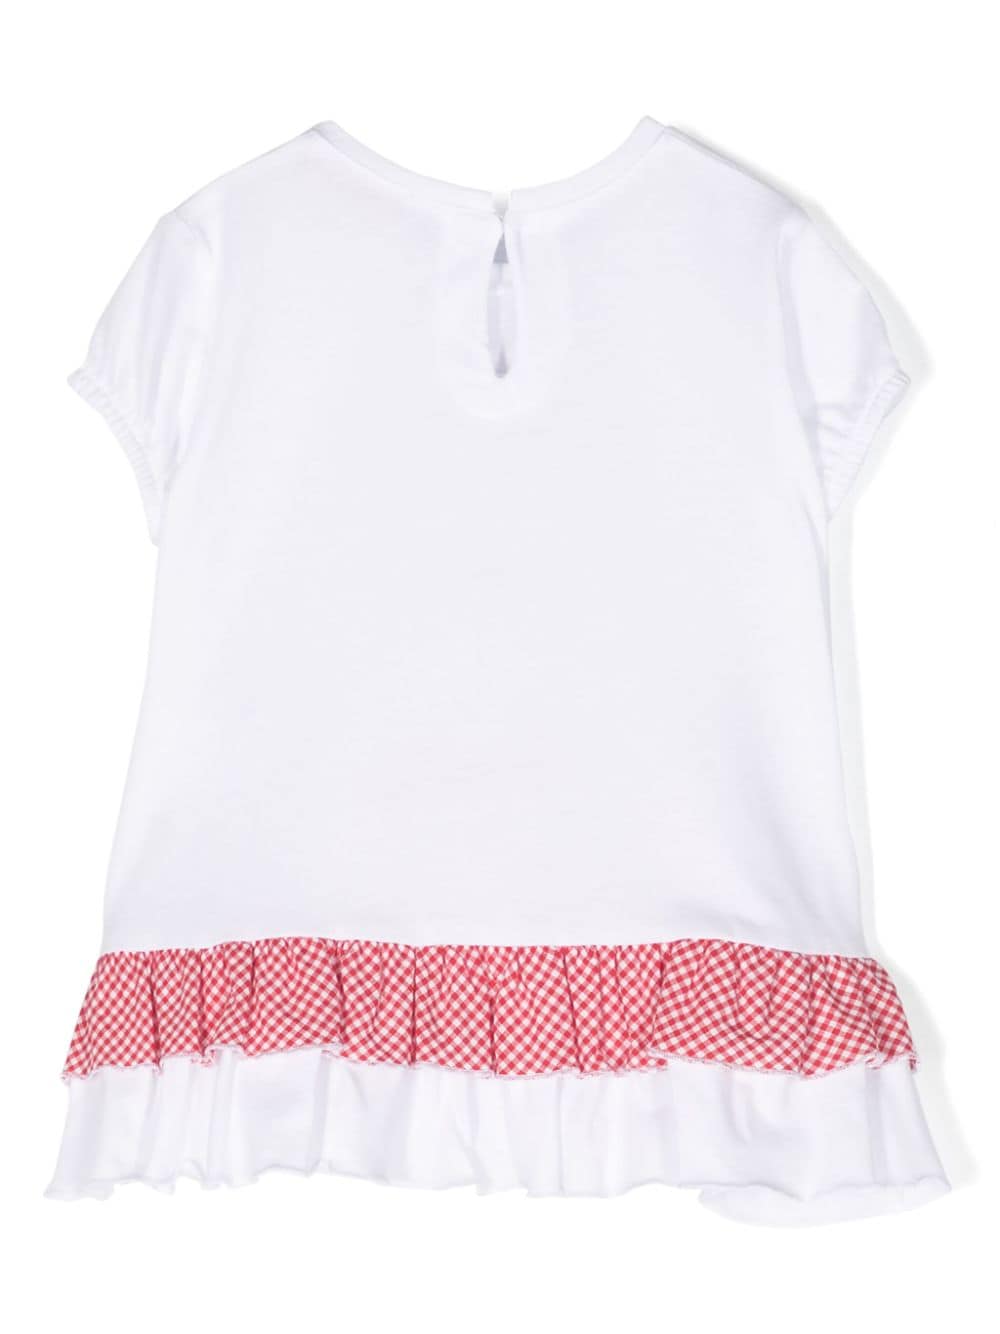 White and red t-shirt for baby girls with print